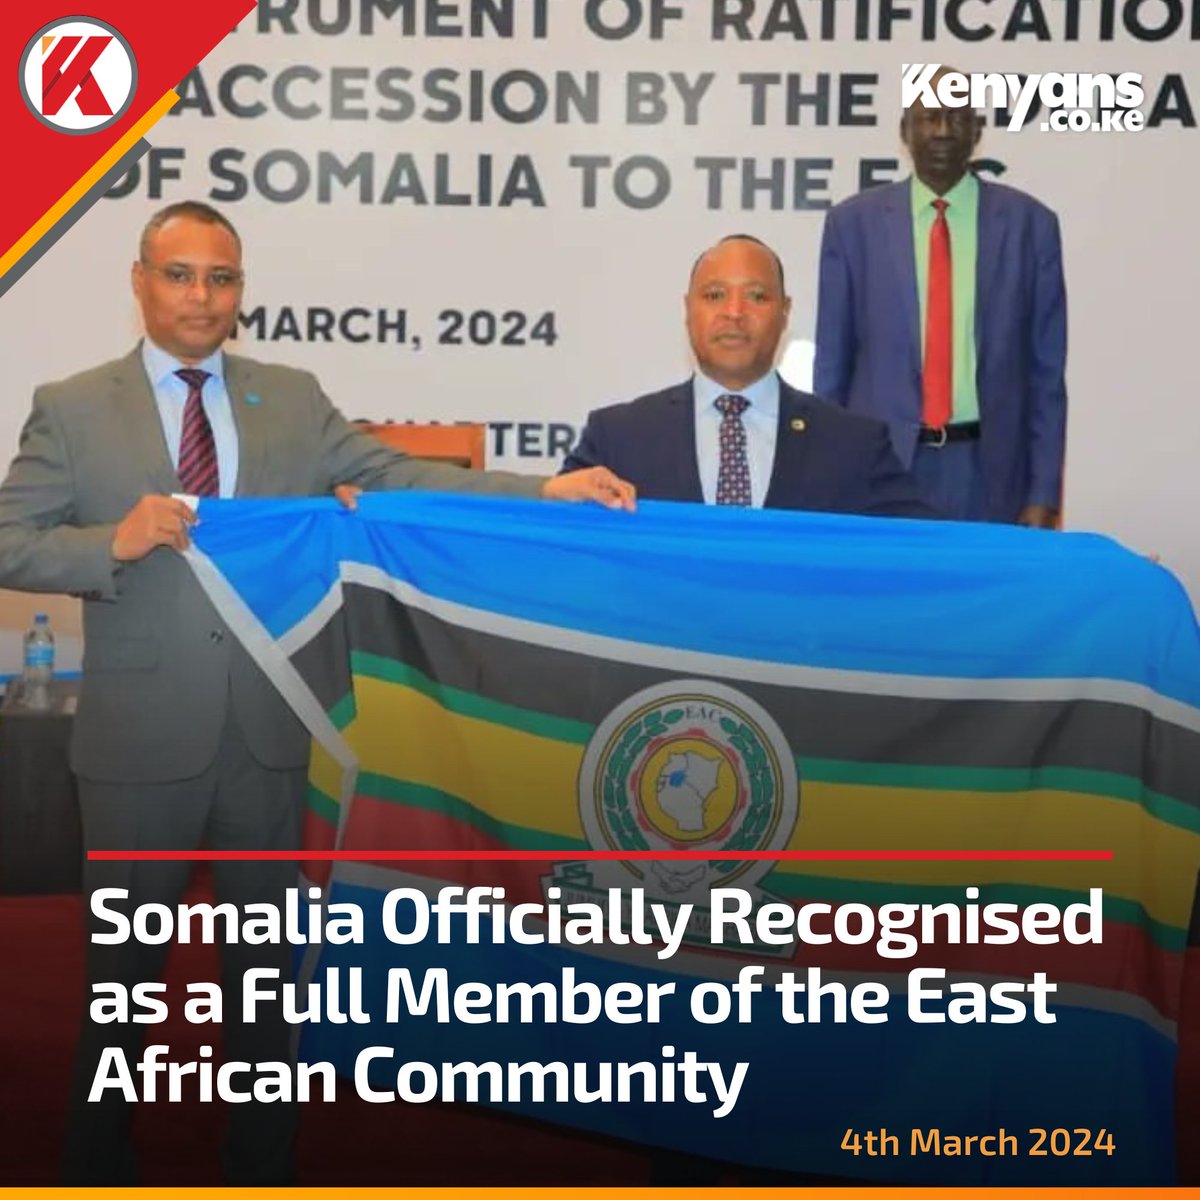 Somalia officially joins the East African Community